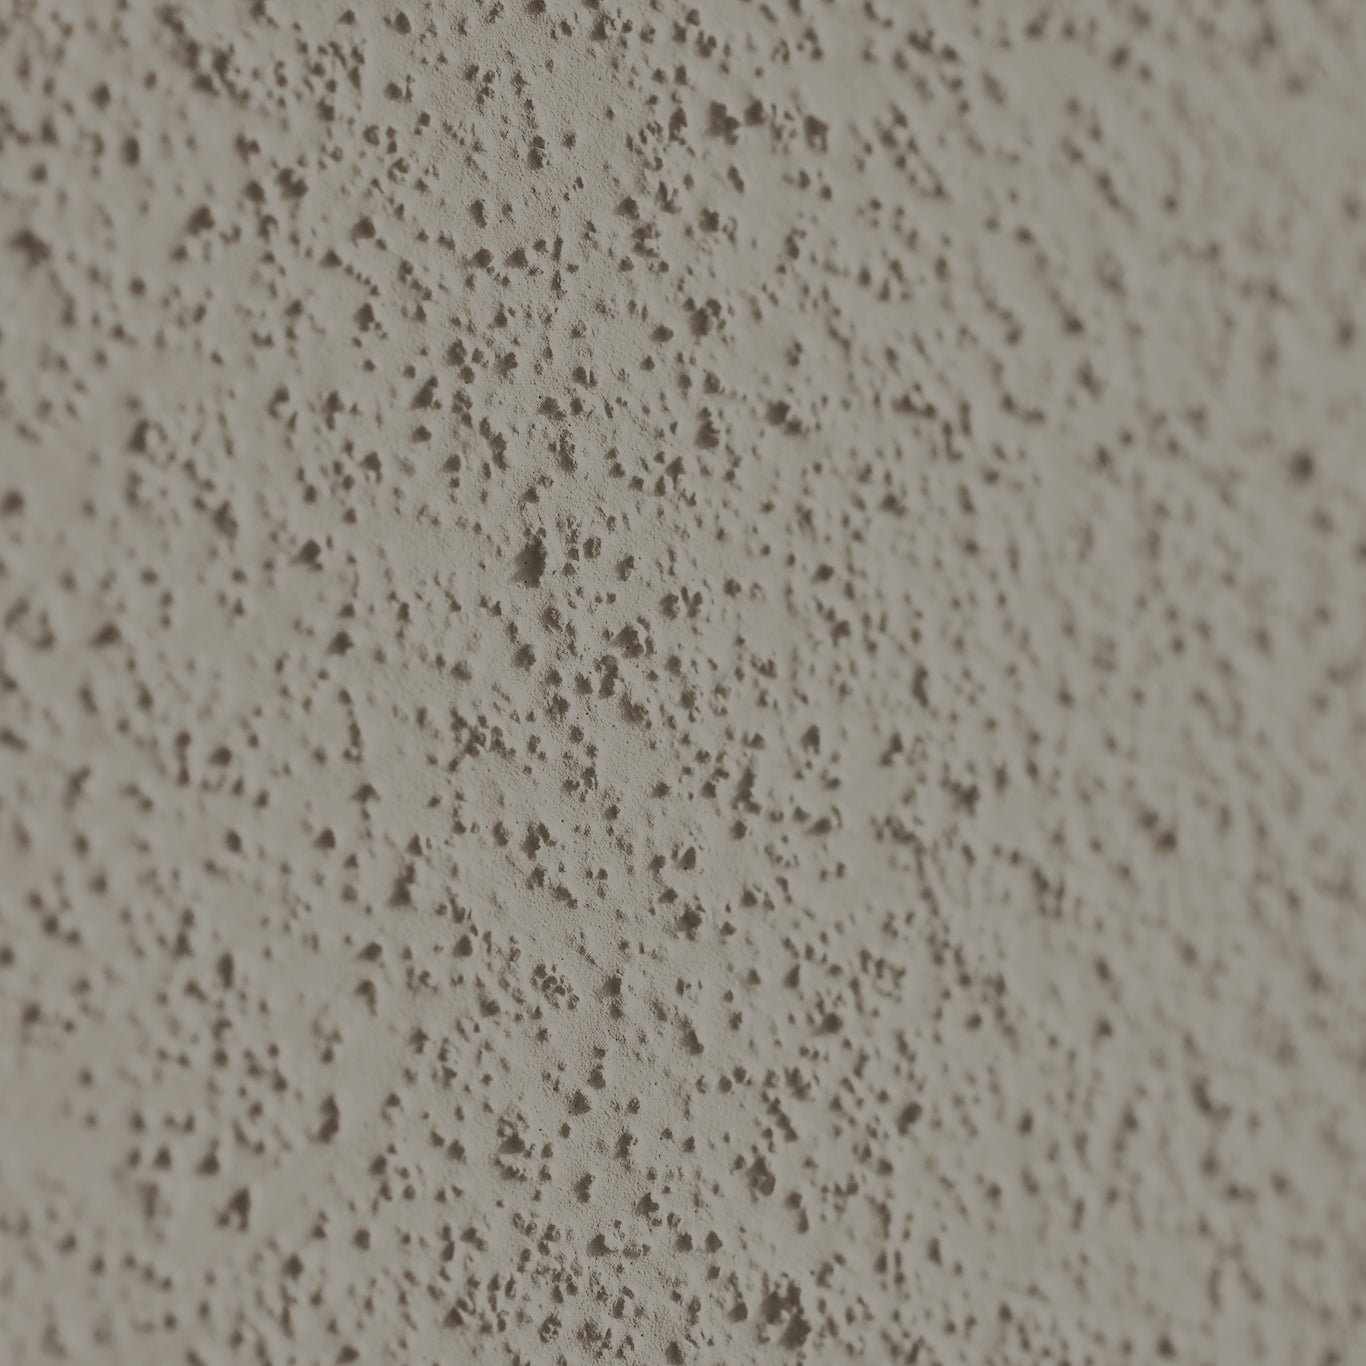 Sands wall scrub - SHADES by Eric Kuster